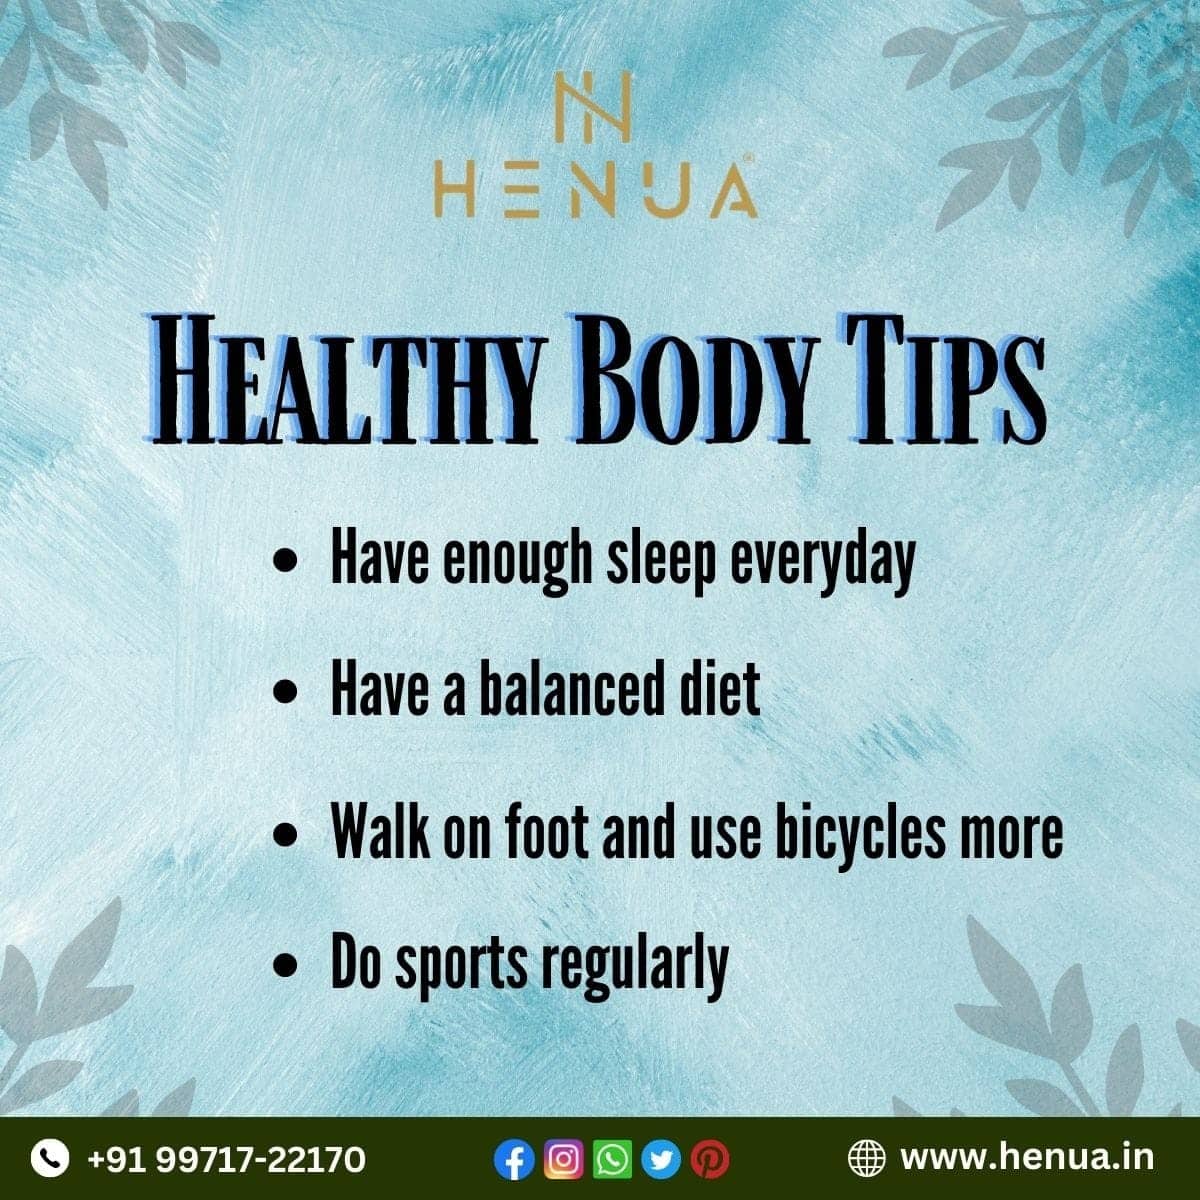 Healthy-Body-Tips-And-Nutrition-With-Henua